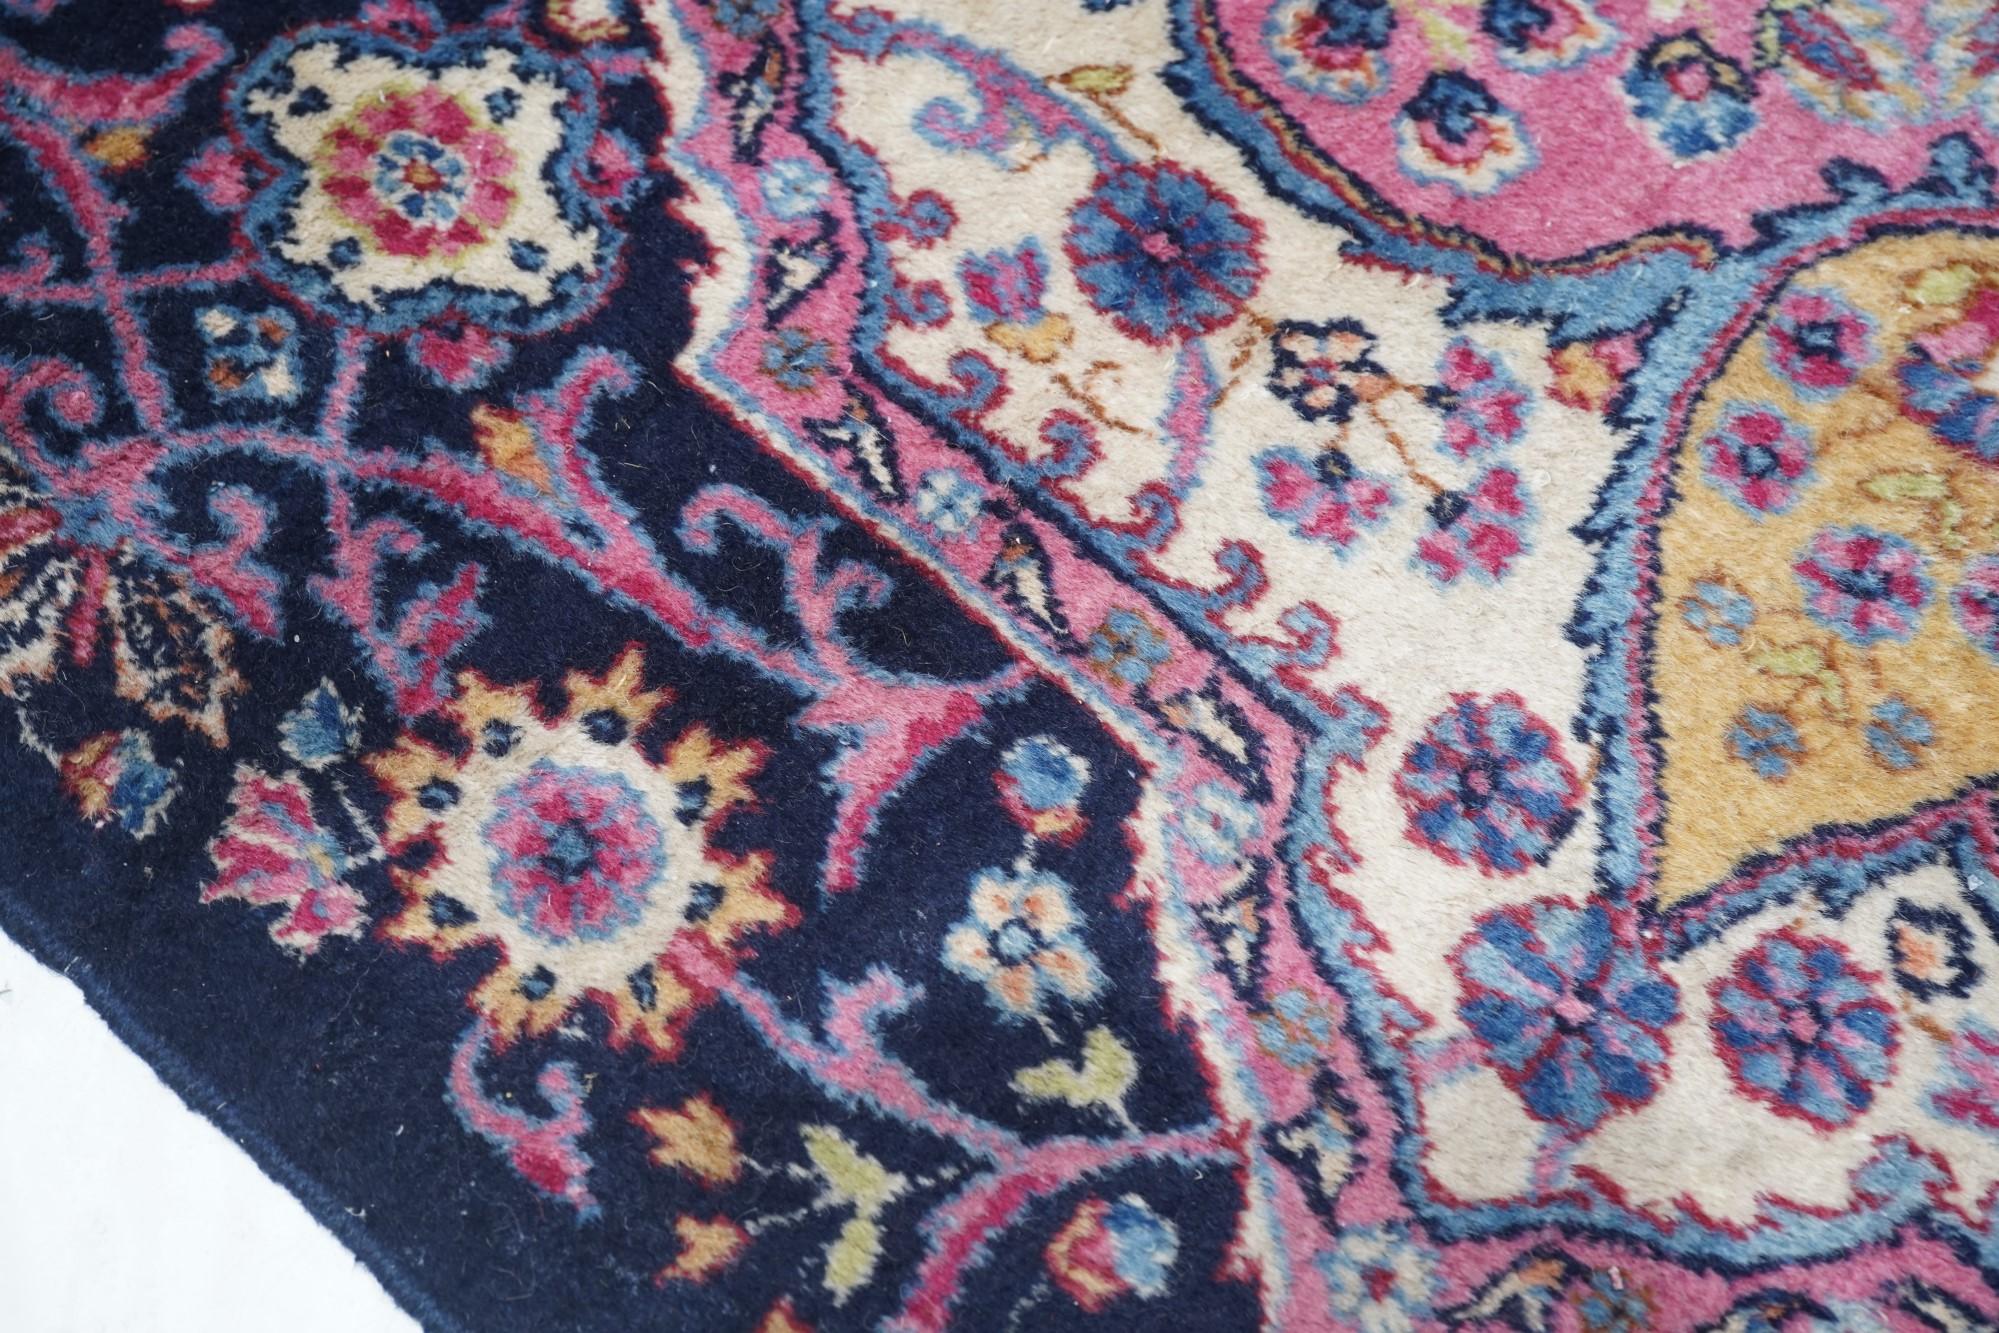 Persia Wool on Cotton Rug In Excellent Condition For Sale In New York, NY